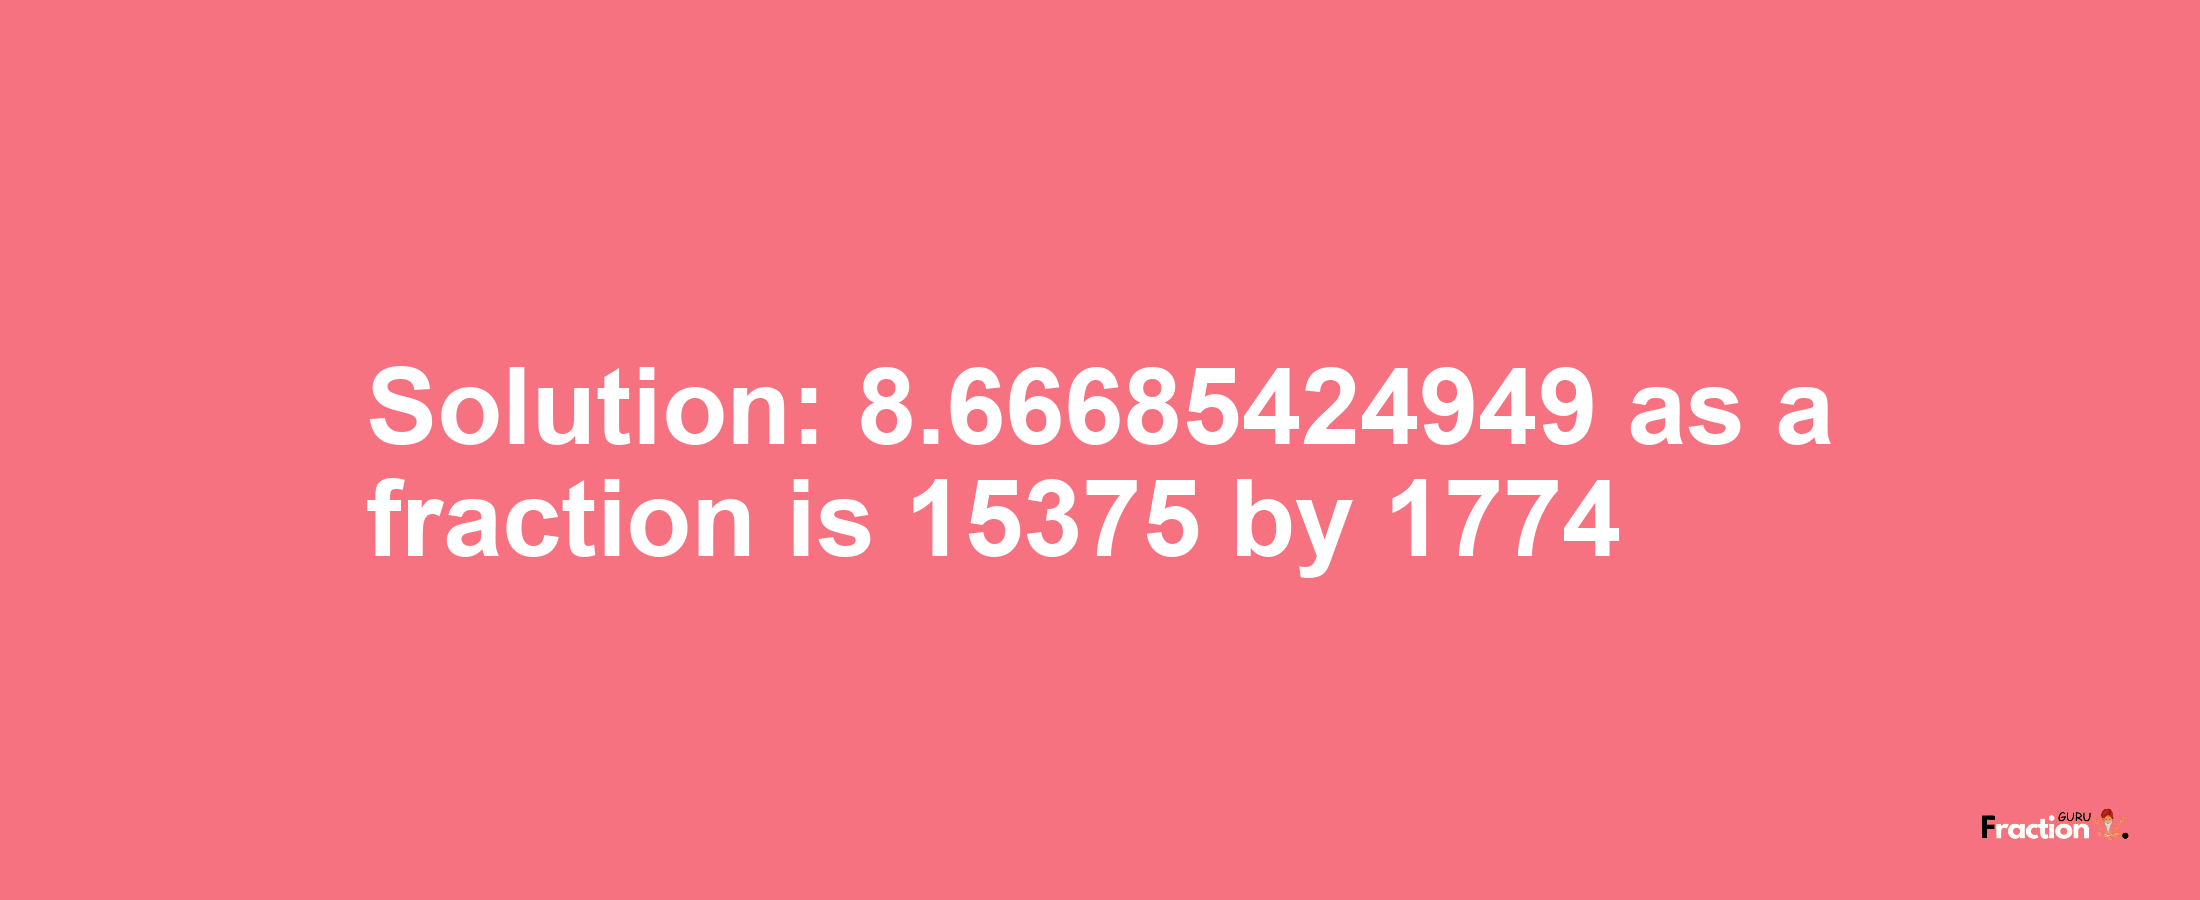 Solution:8.66685424949 as a fraction is 15375/1774